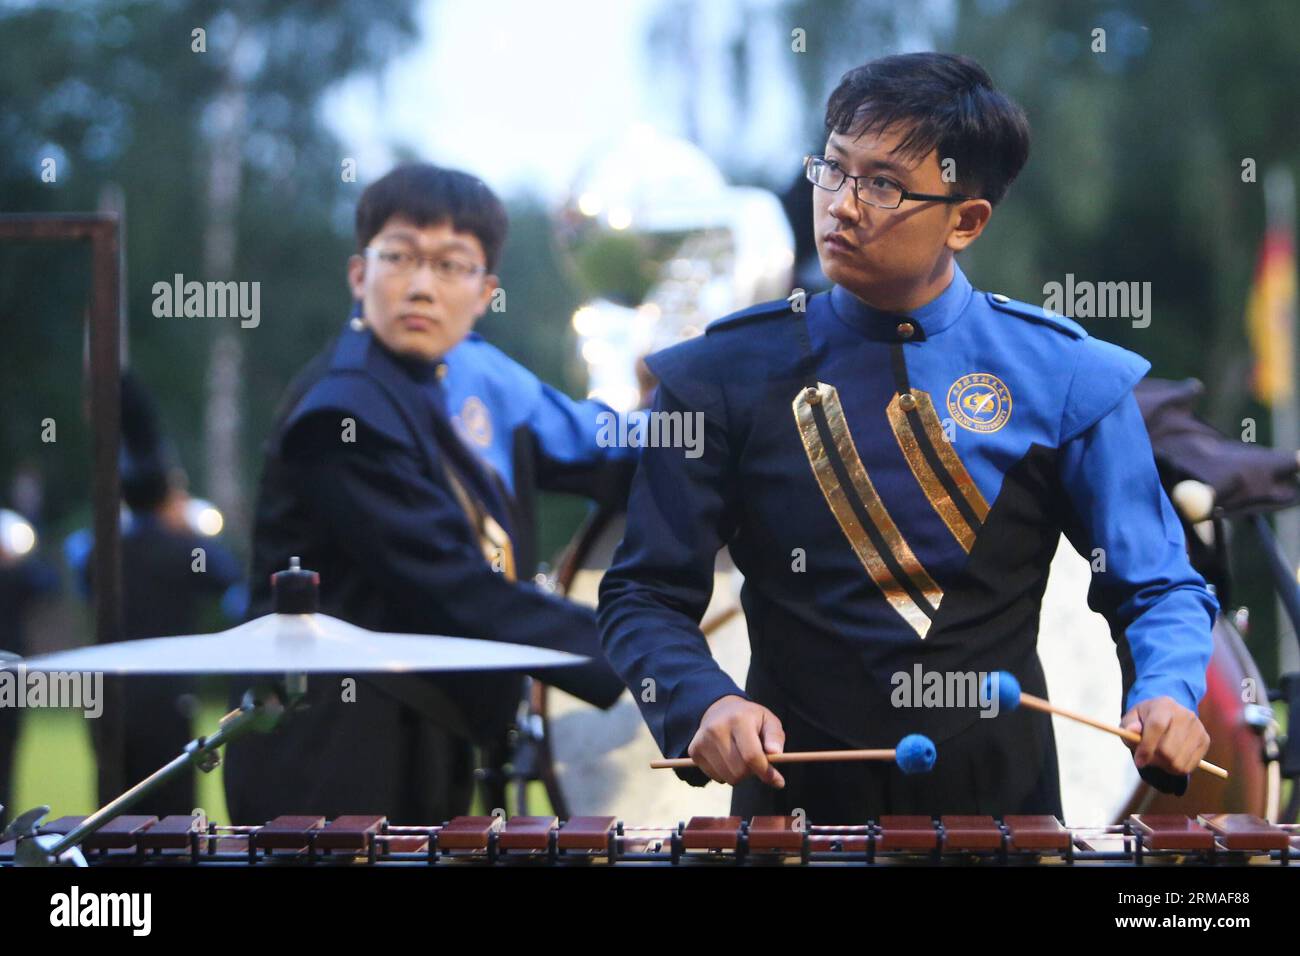 (140706) -- RASTEDE, July 5, 2014 (Xinhua) -- Gong Tianyao (front), member of Beihang University s marching band, performs during the 59th International Rasteder Music Day in Rastede, Germany, on July 5, 2014. More than 50 bands and thousands of musicians from 6 countries and regions took part in the three-day International Rasteder Music Day, one of the oldest music festivals in Germany. (Xinhua/Zhang Fan) GERMANY-RASTEDE-MUSIC DAY-CHINESE MARCHING BAND PUBLICATIONxNOTxINxCHN   Rastede July 5 2014 XINHUA Gong  Front member of  University S Marching Tie performs during The 59th International Stock Photo